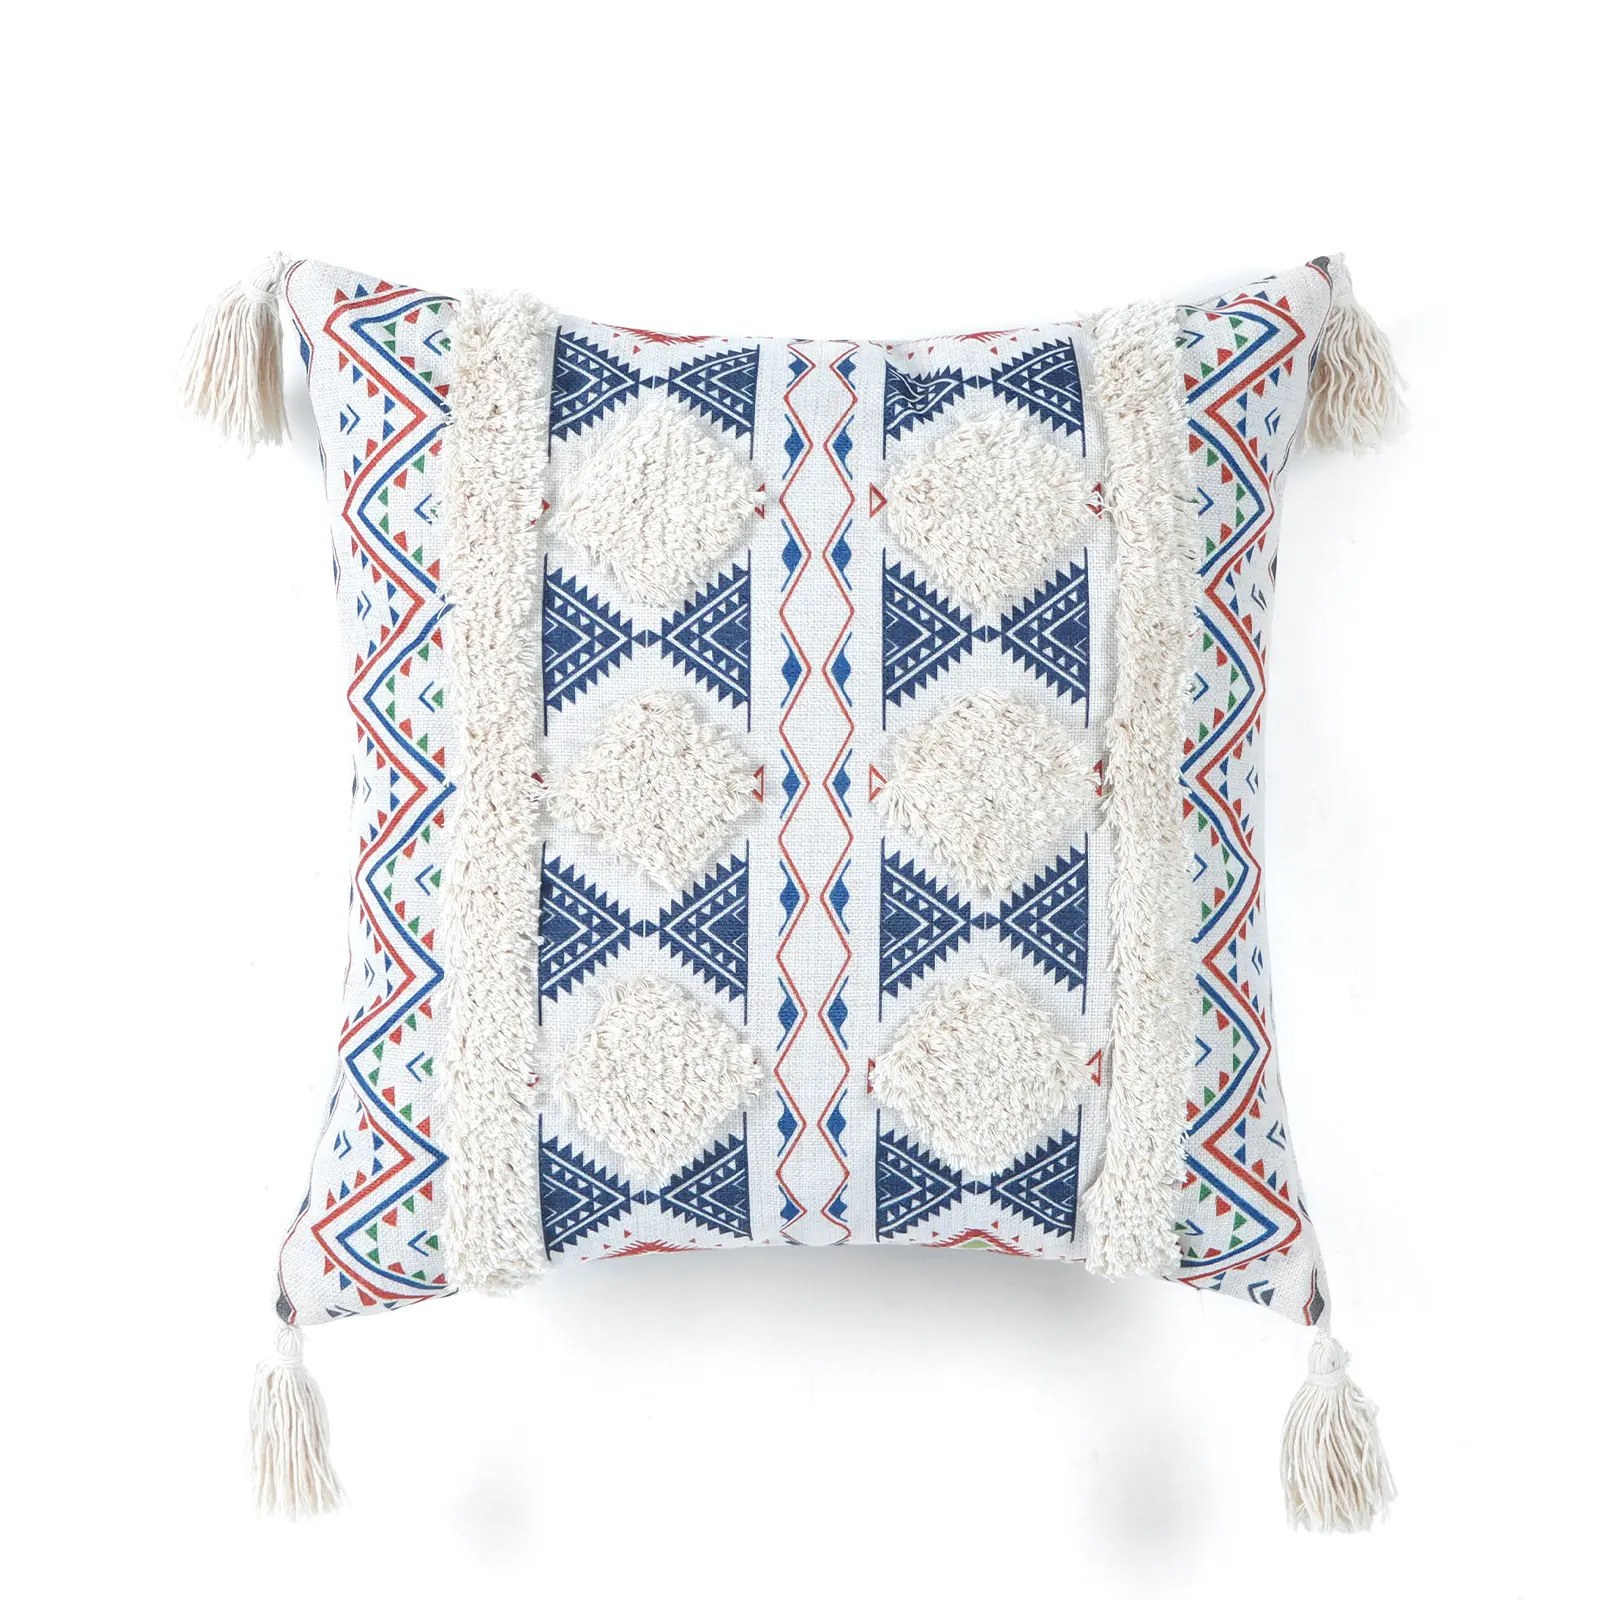 Square Cushion Covers Geometric Pattern Boho Tufted Tribal Throw Pillow Cases With Tassels